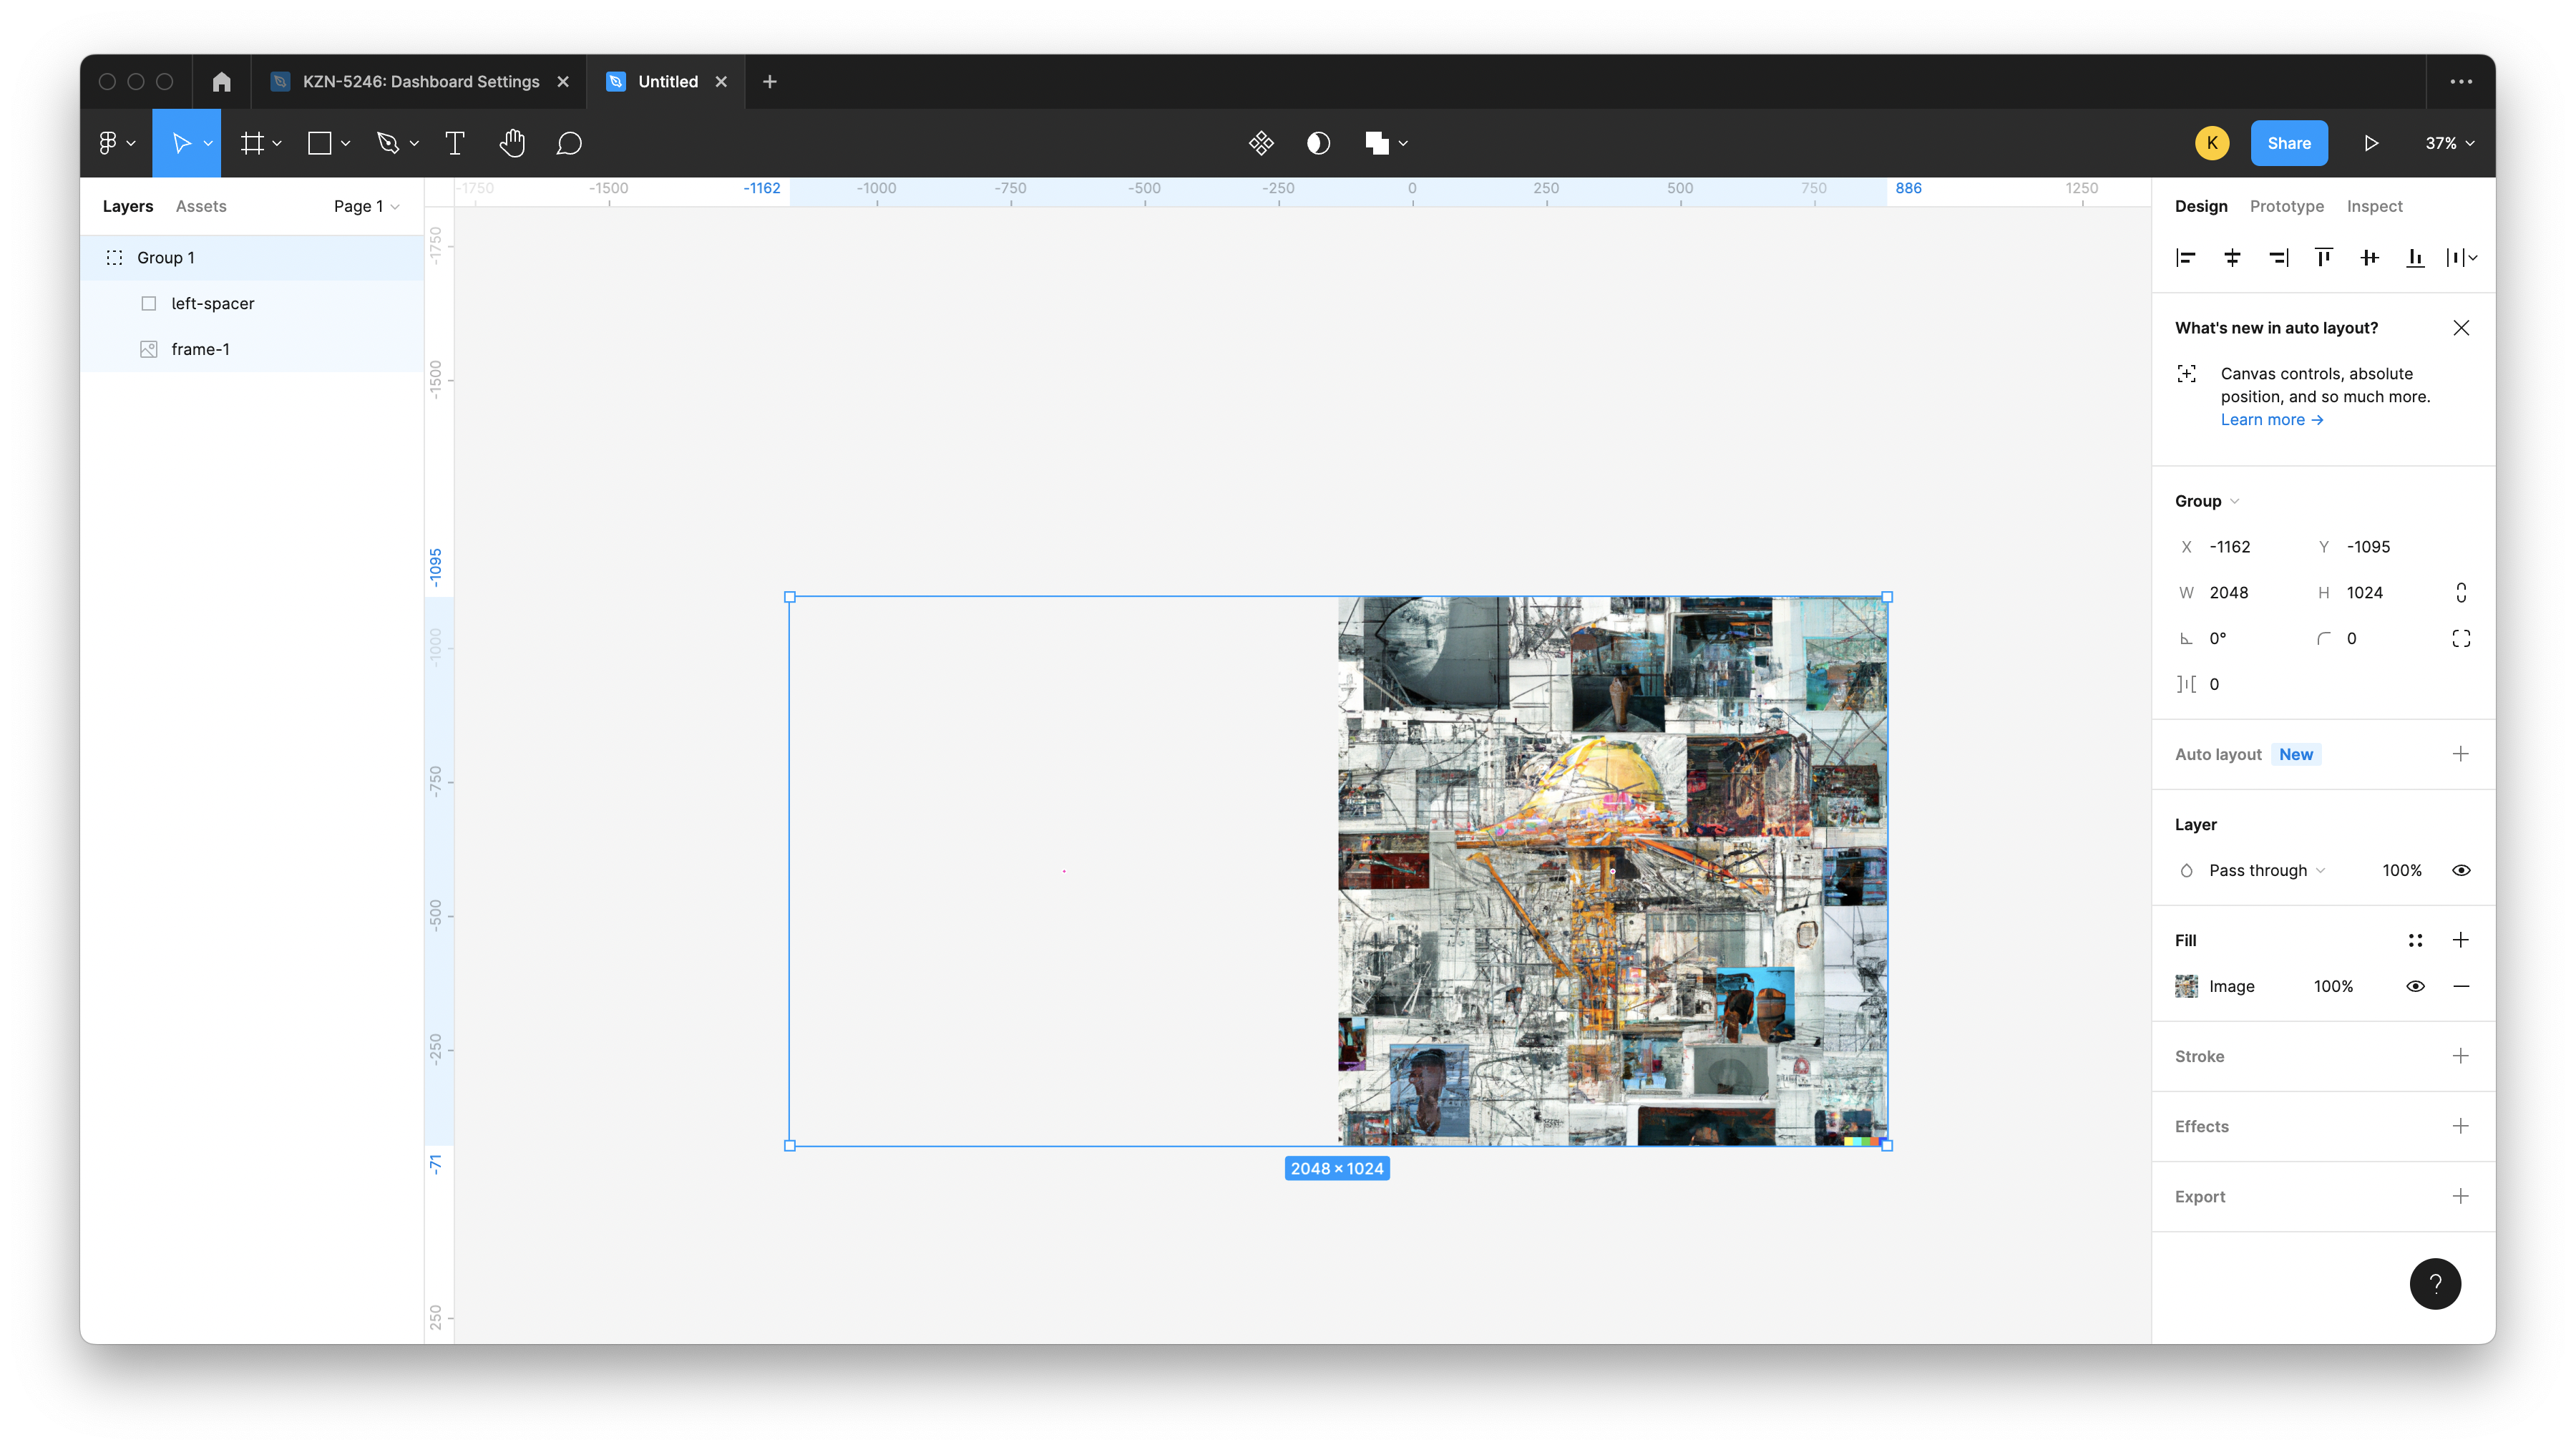 A screenshot of Figma showing the square image and an equally sized transparent area next to it